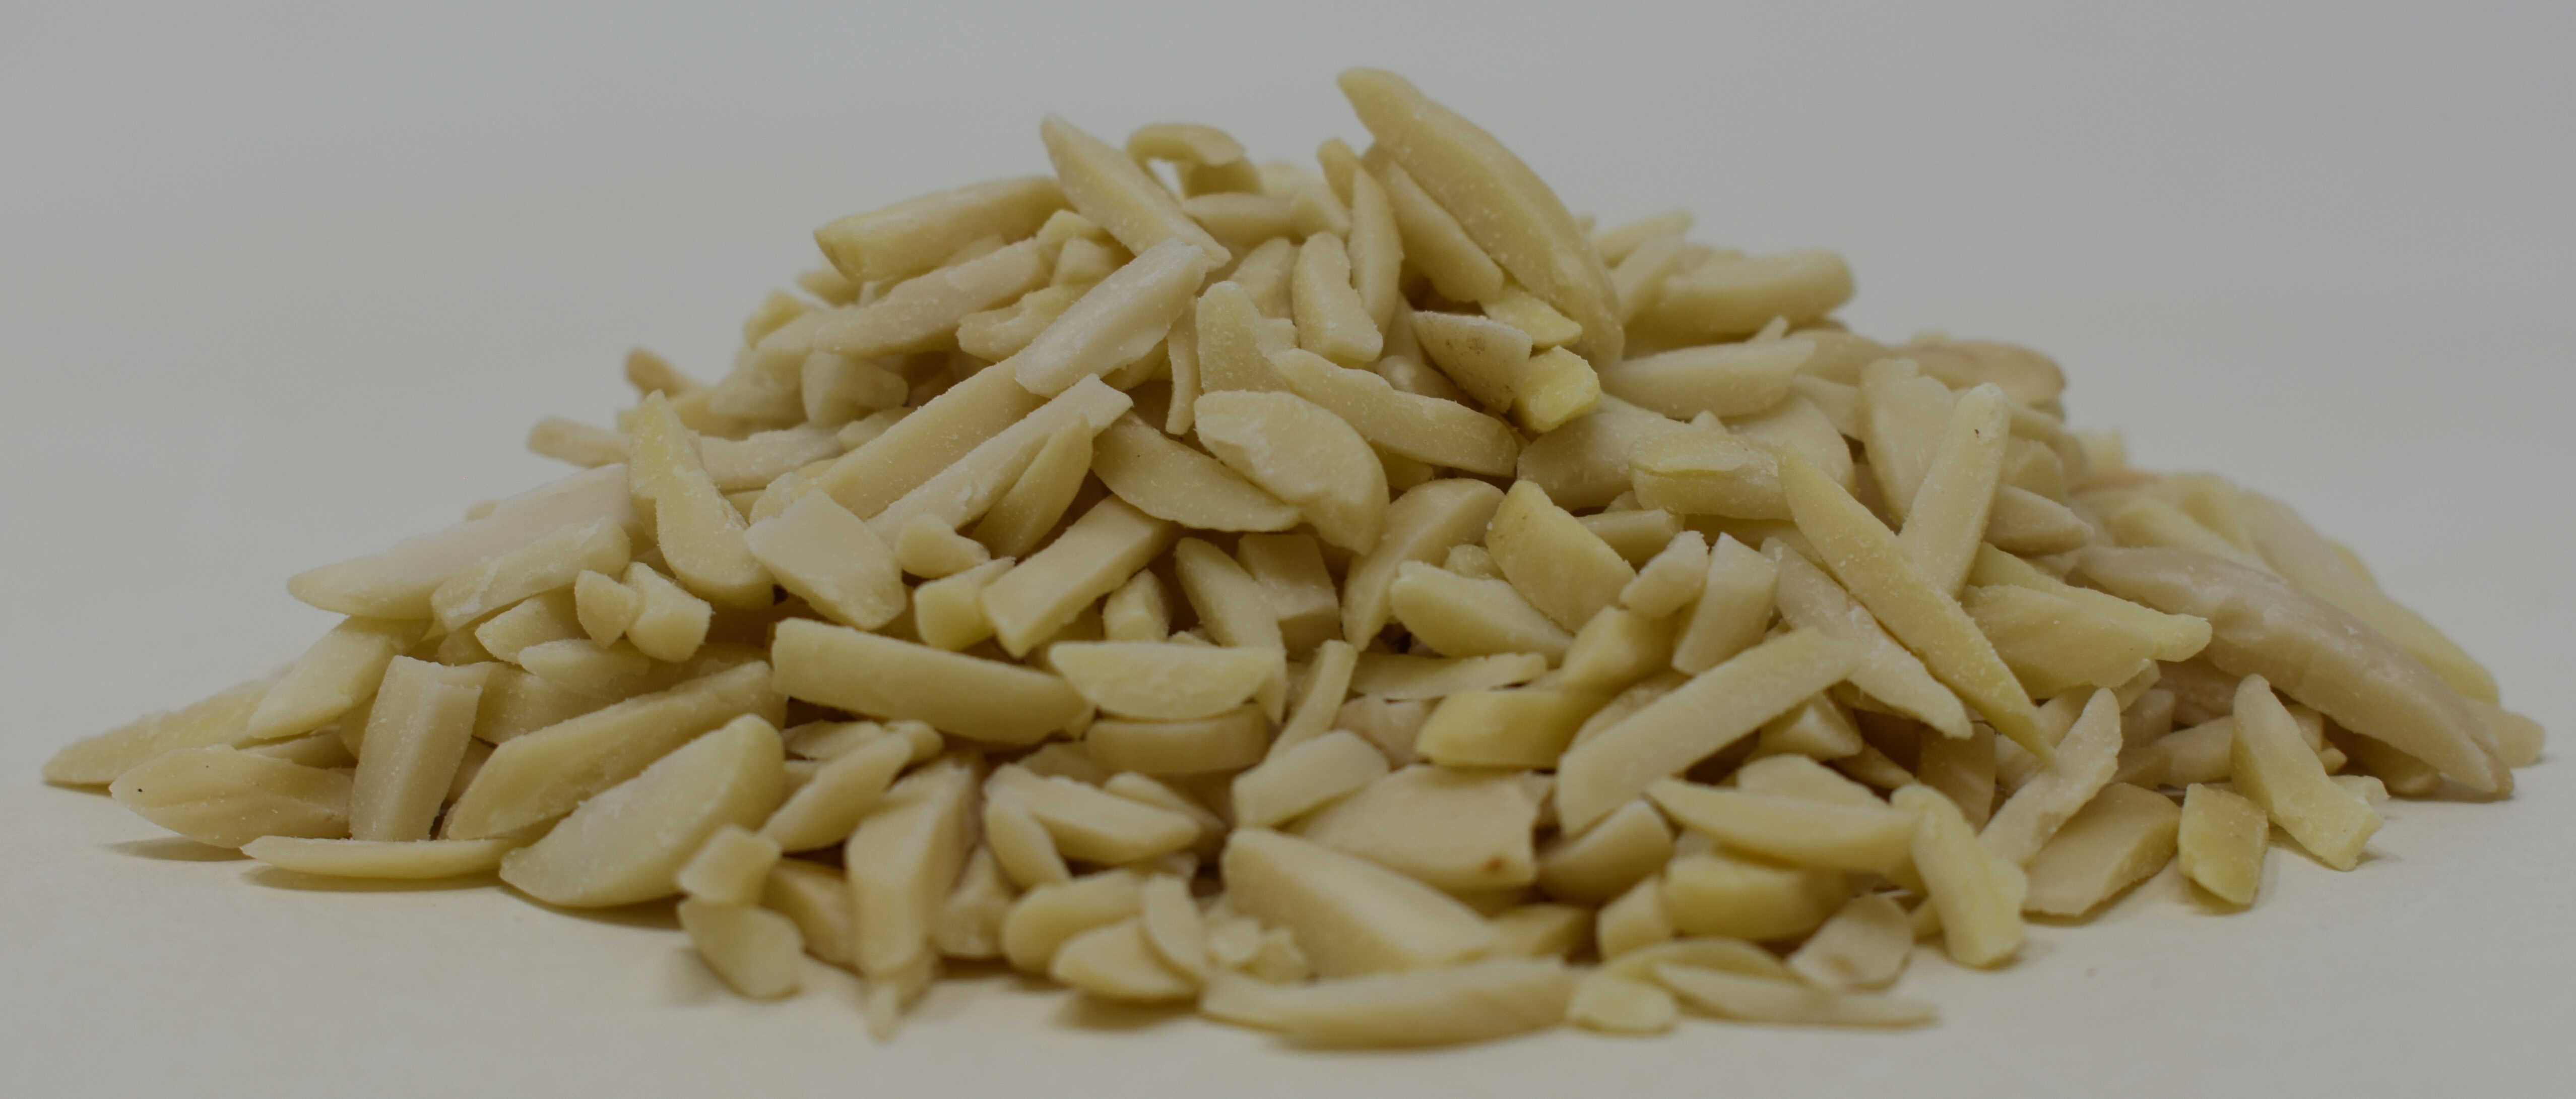 Almonds <BR>(Slivered, Raw and Unsalted) - Side Photo